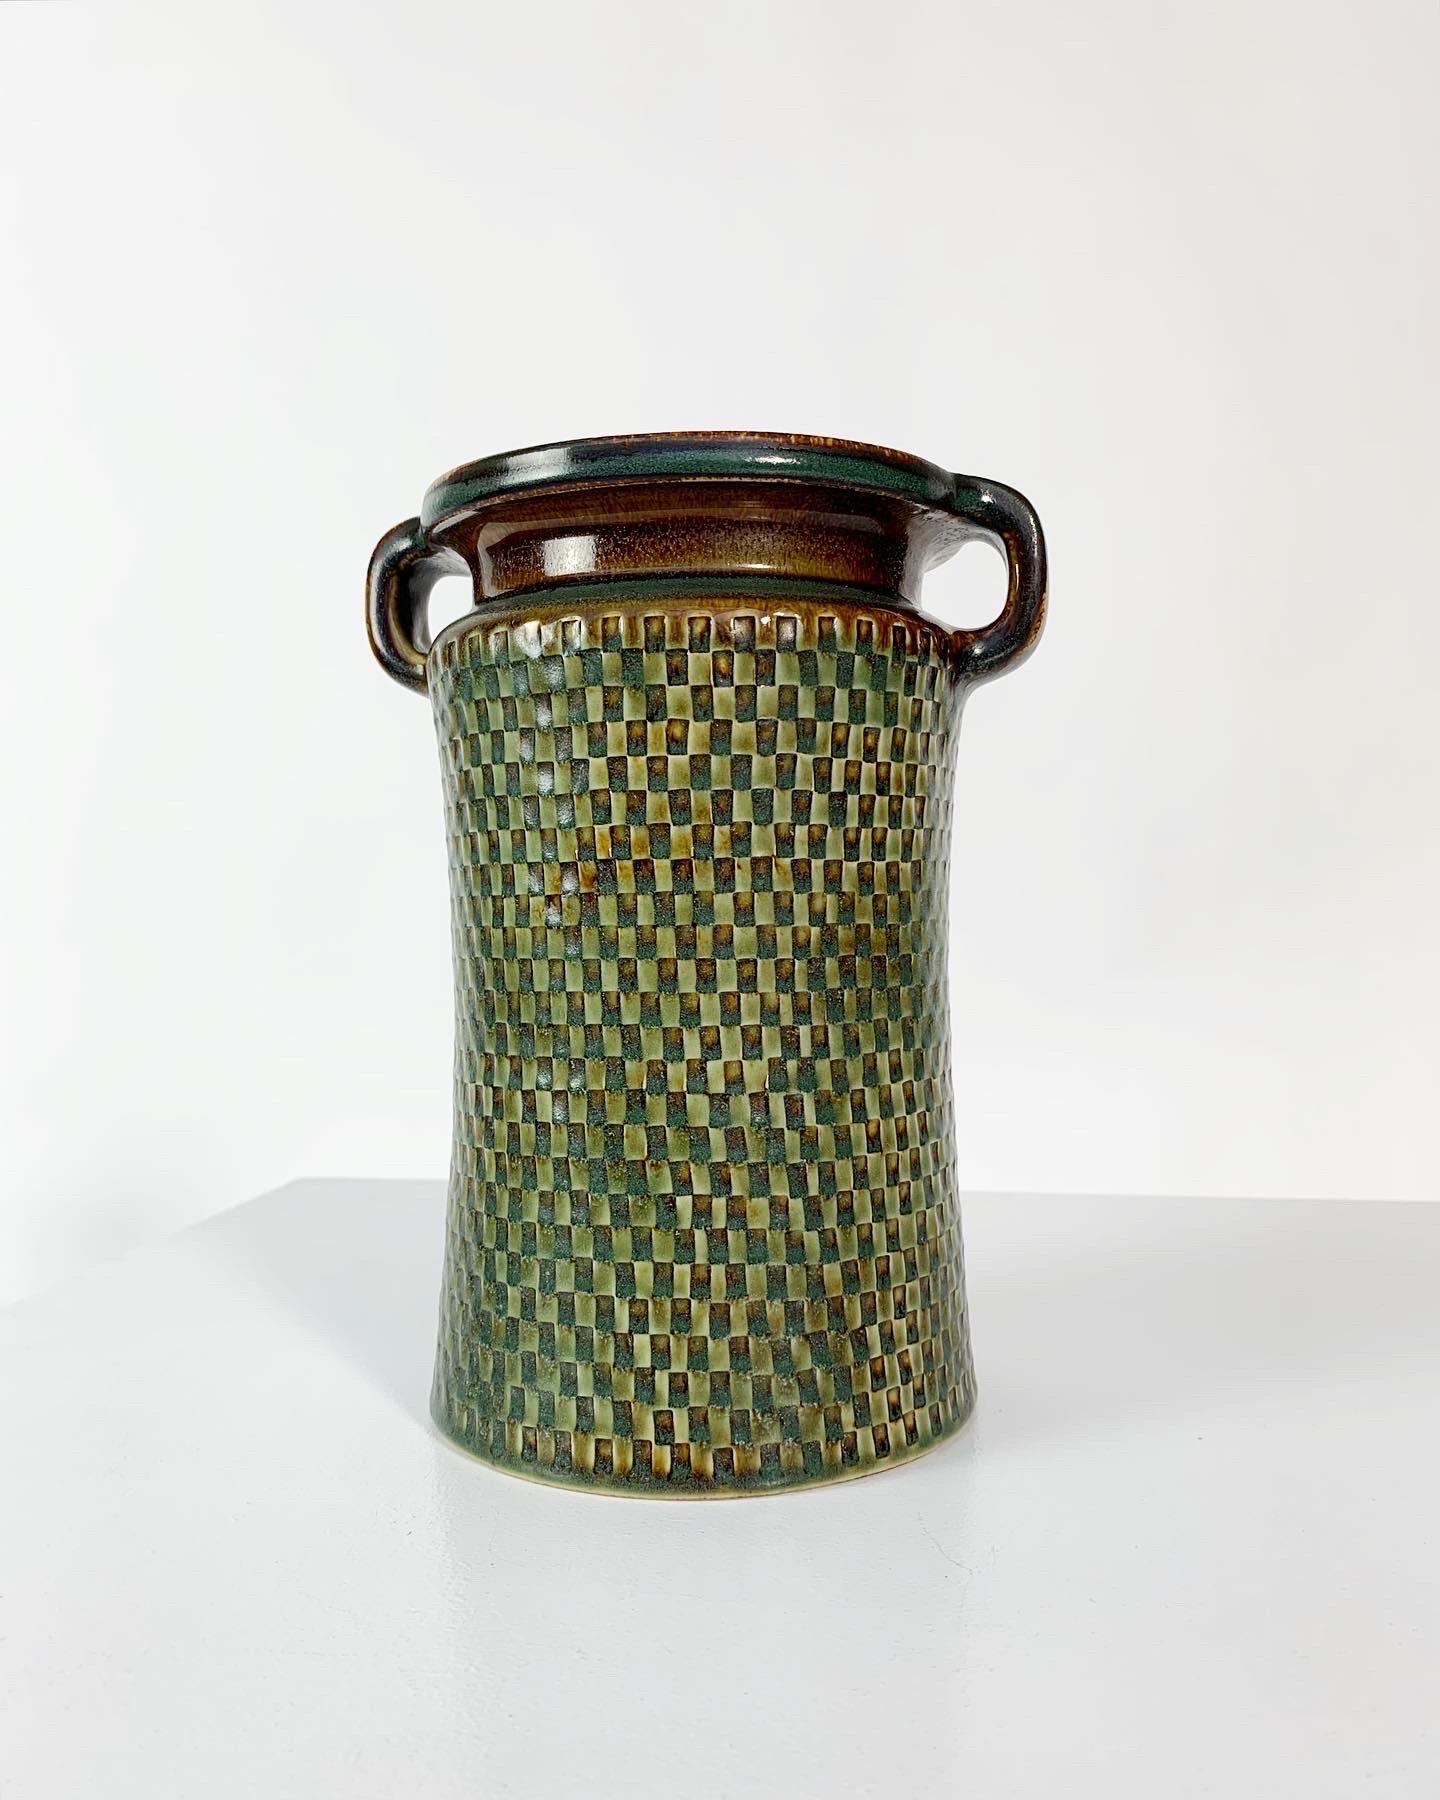 Rare stoneware vase by master caramist Stig Lindberg for the Swedish ceramic manufacturer Gustavsberg in 1968.

Beautiful relief checker pattern, glazed in hues of green and brown. Hand-signed underneath.

Measures: Height: 21 cm
Width with